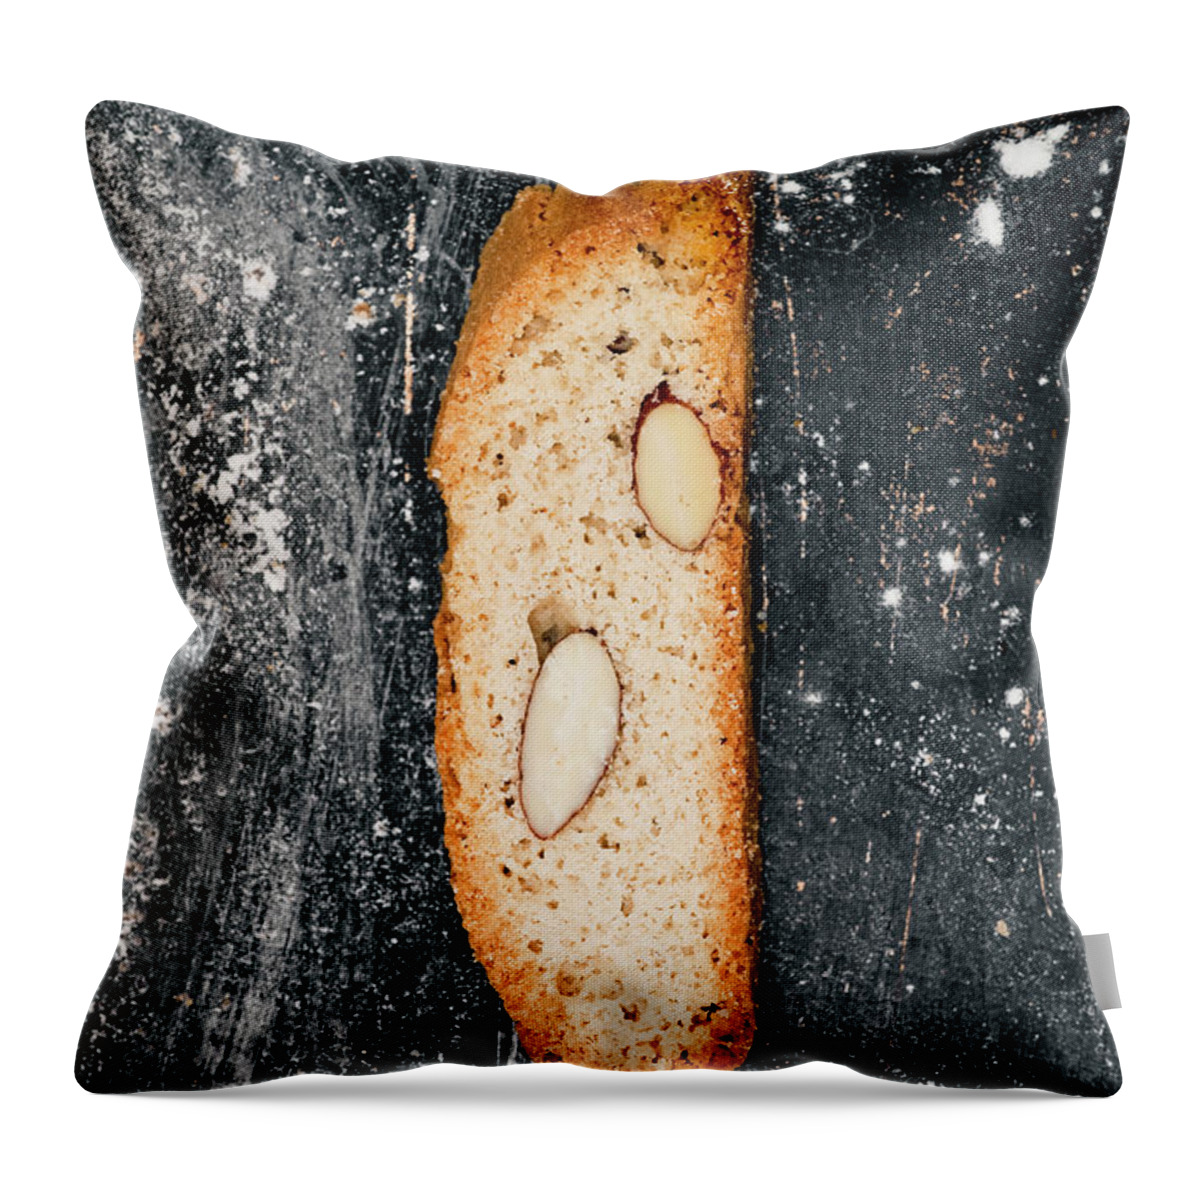 Sweden Throw Pillow featuring the photograph Biscotti With Almonds, Directly Above by Johner Images